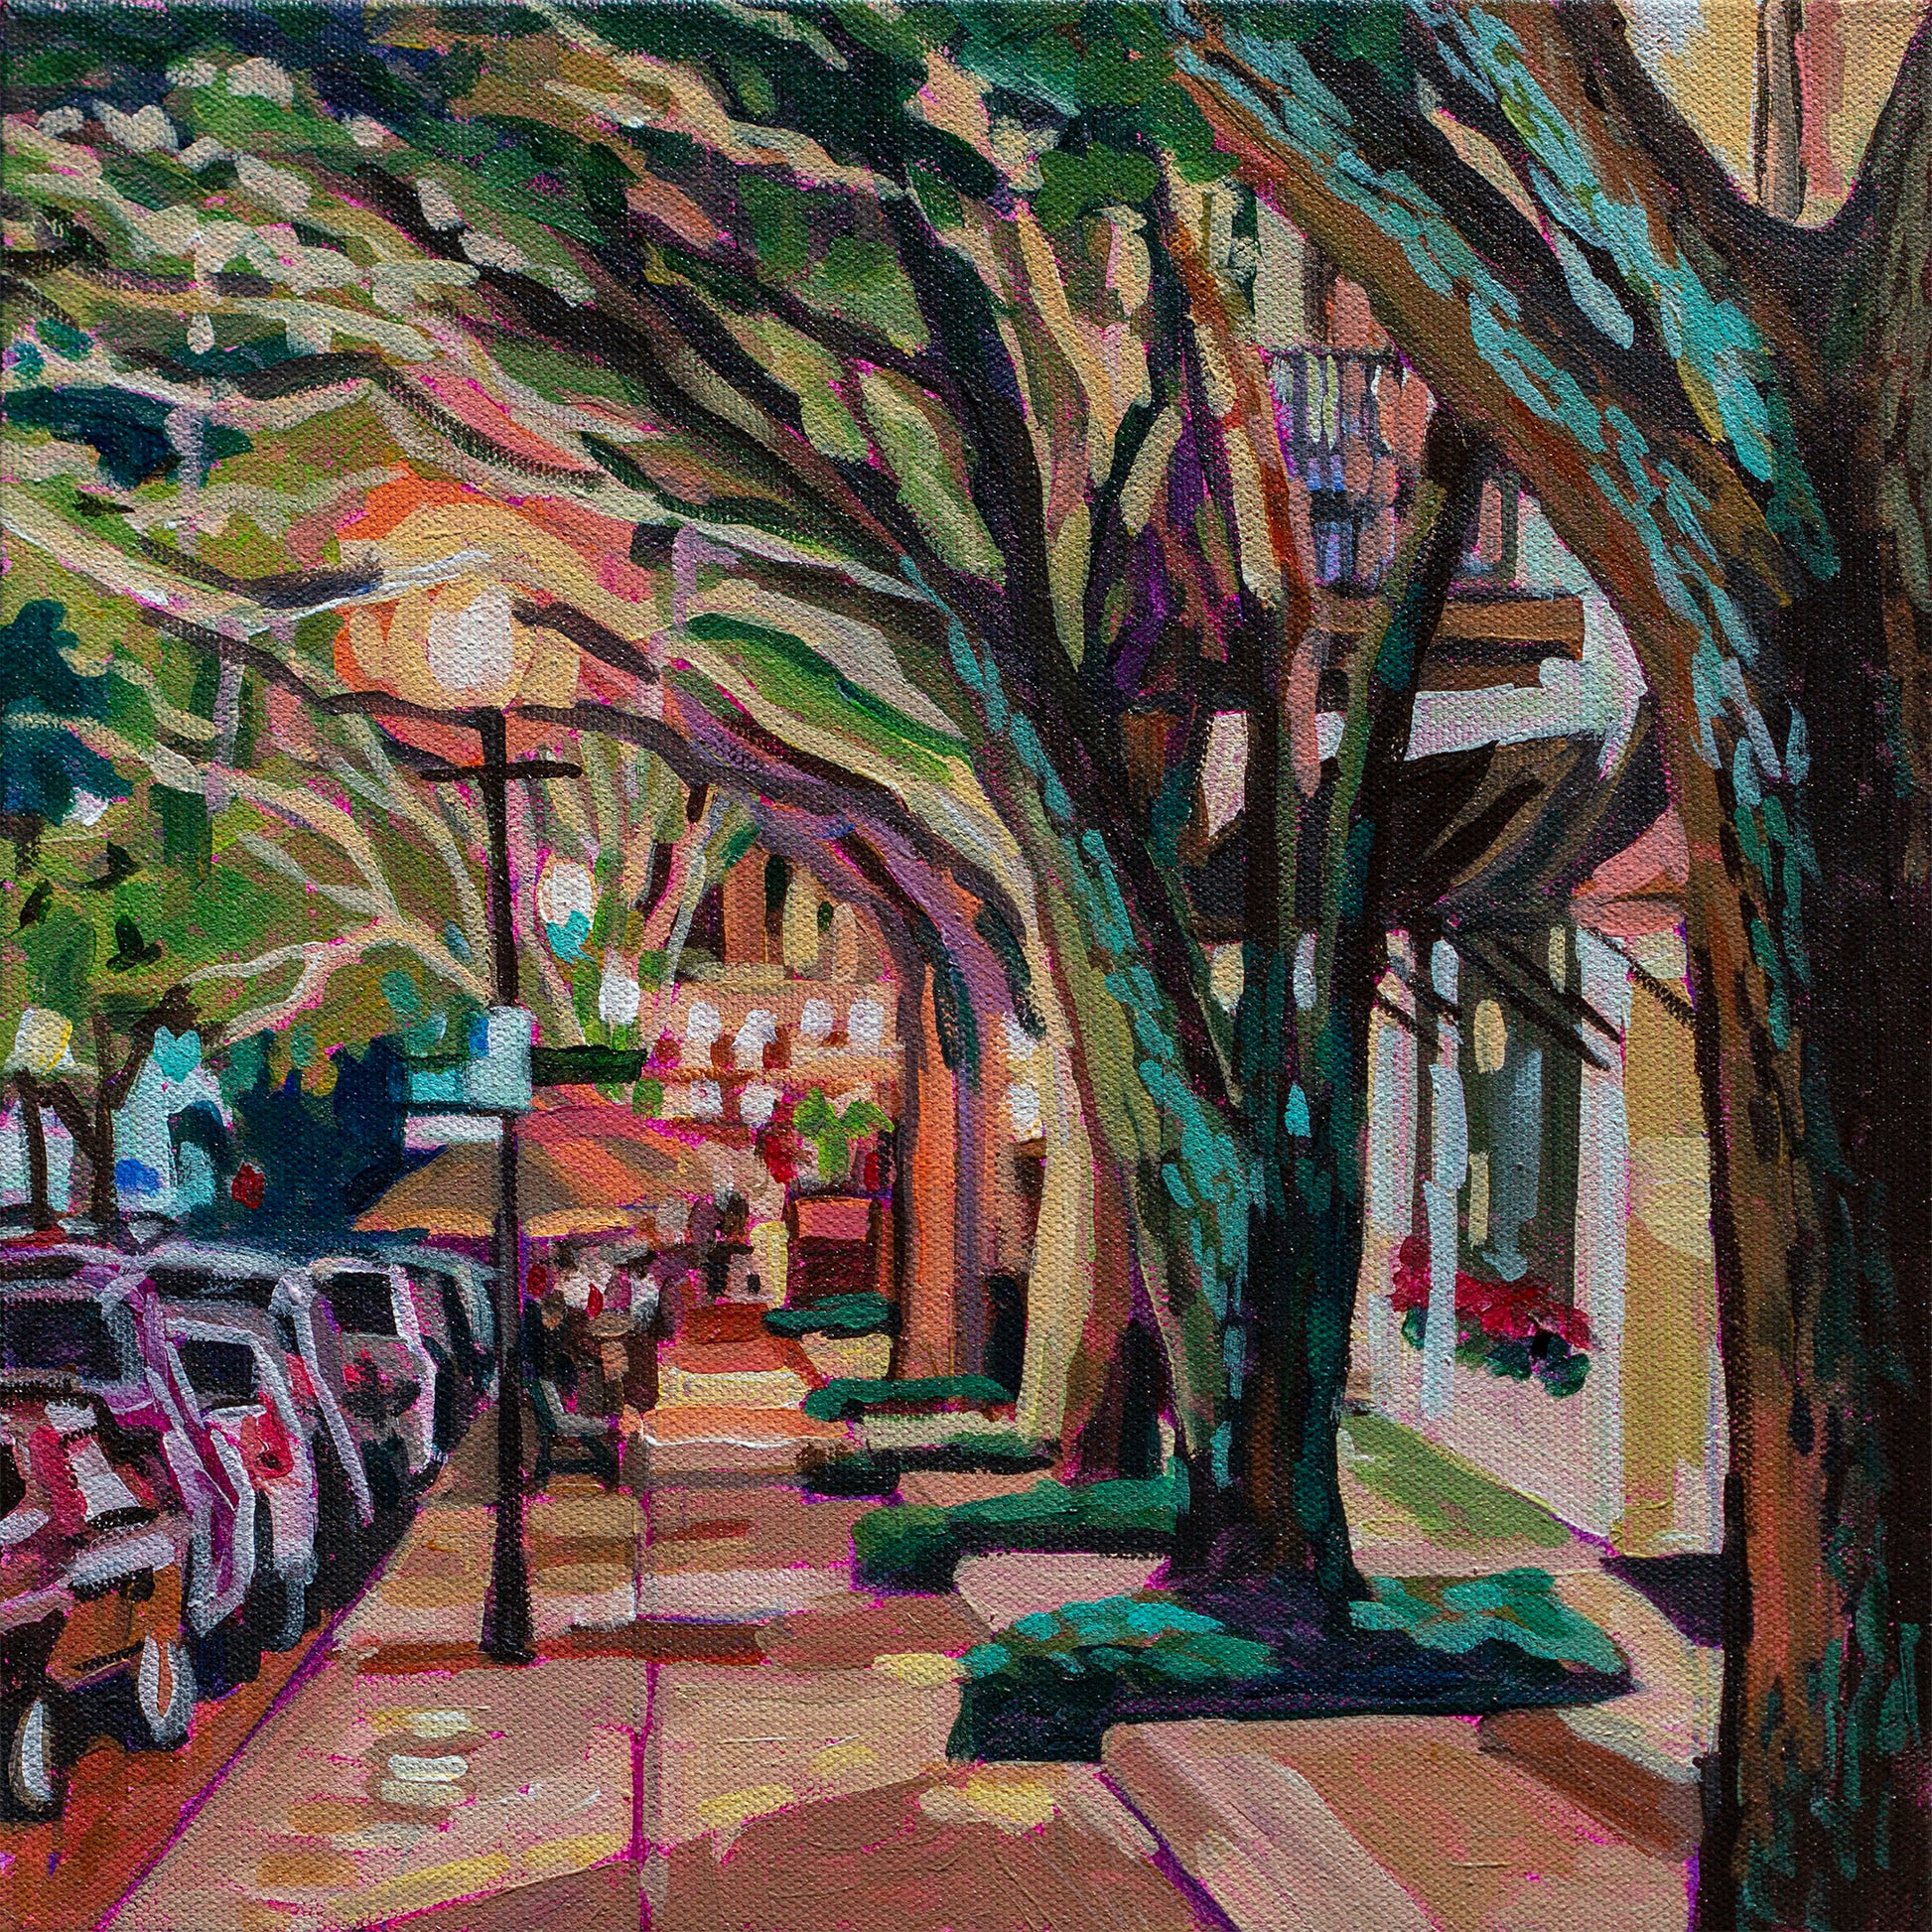 12x12 painting of night scene, dramatic light on treelined street with vibrant colors